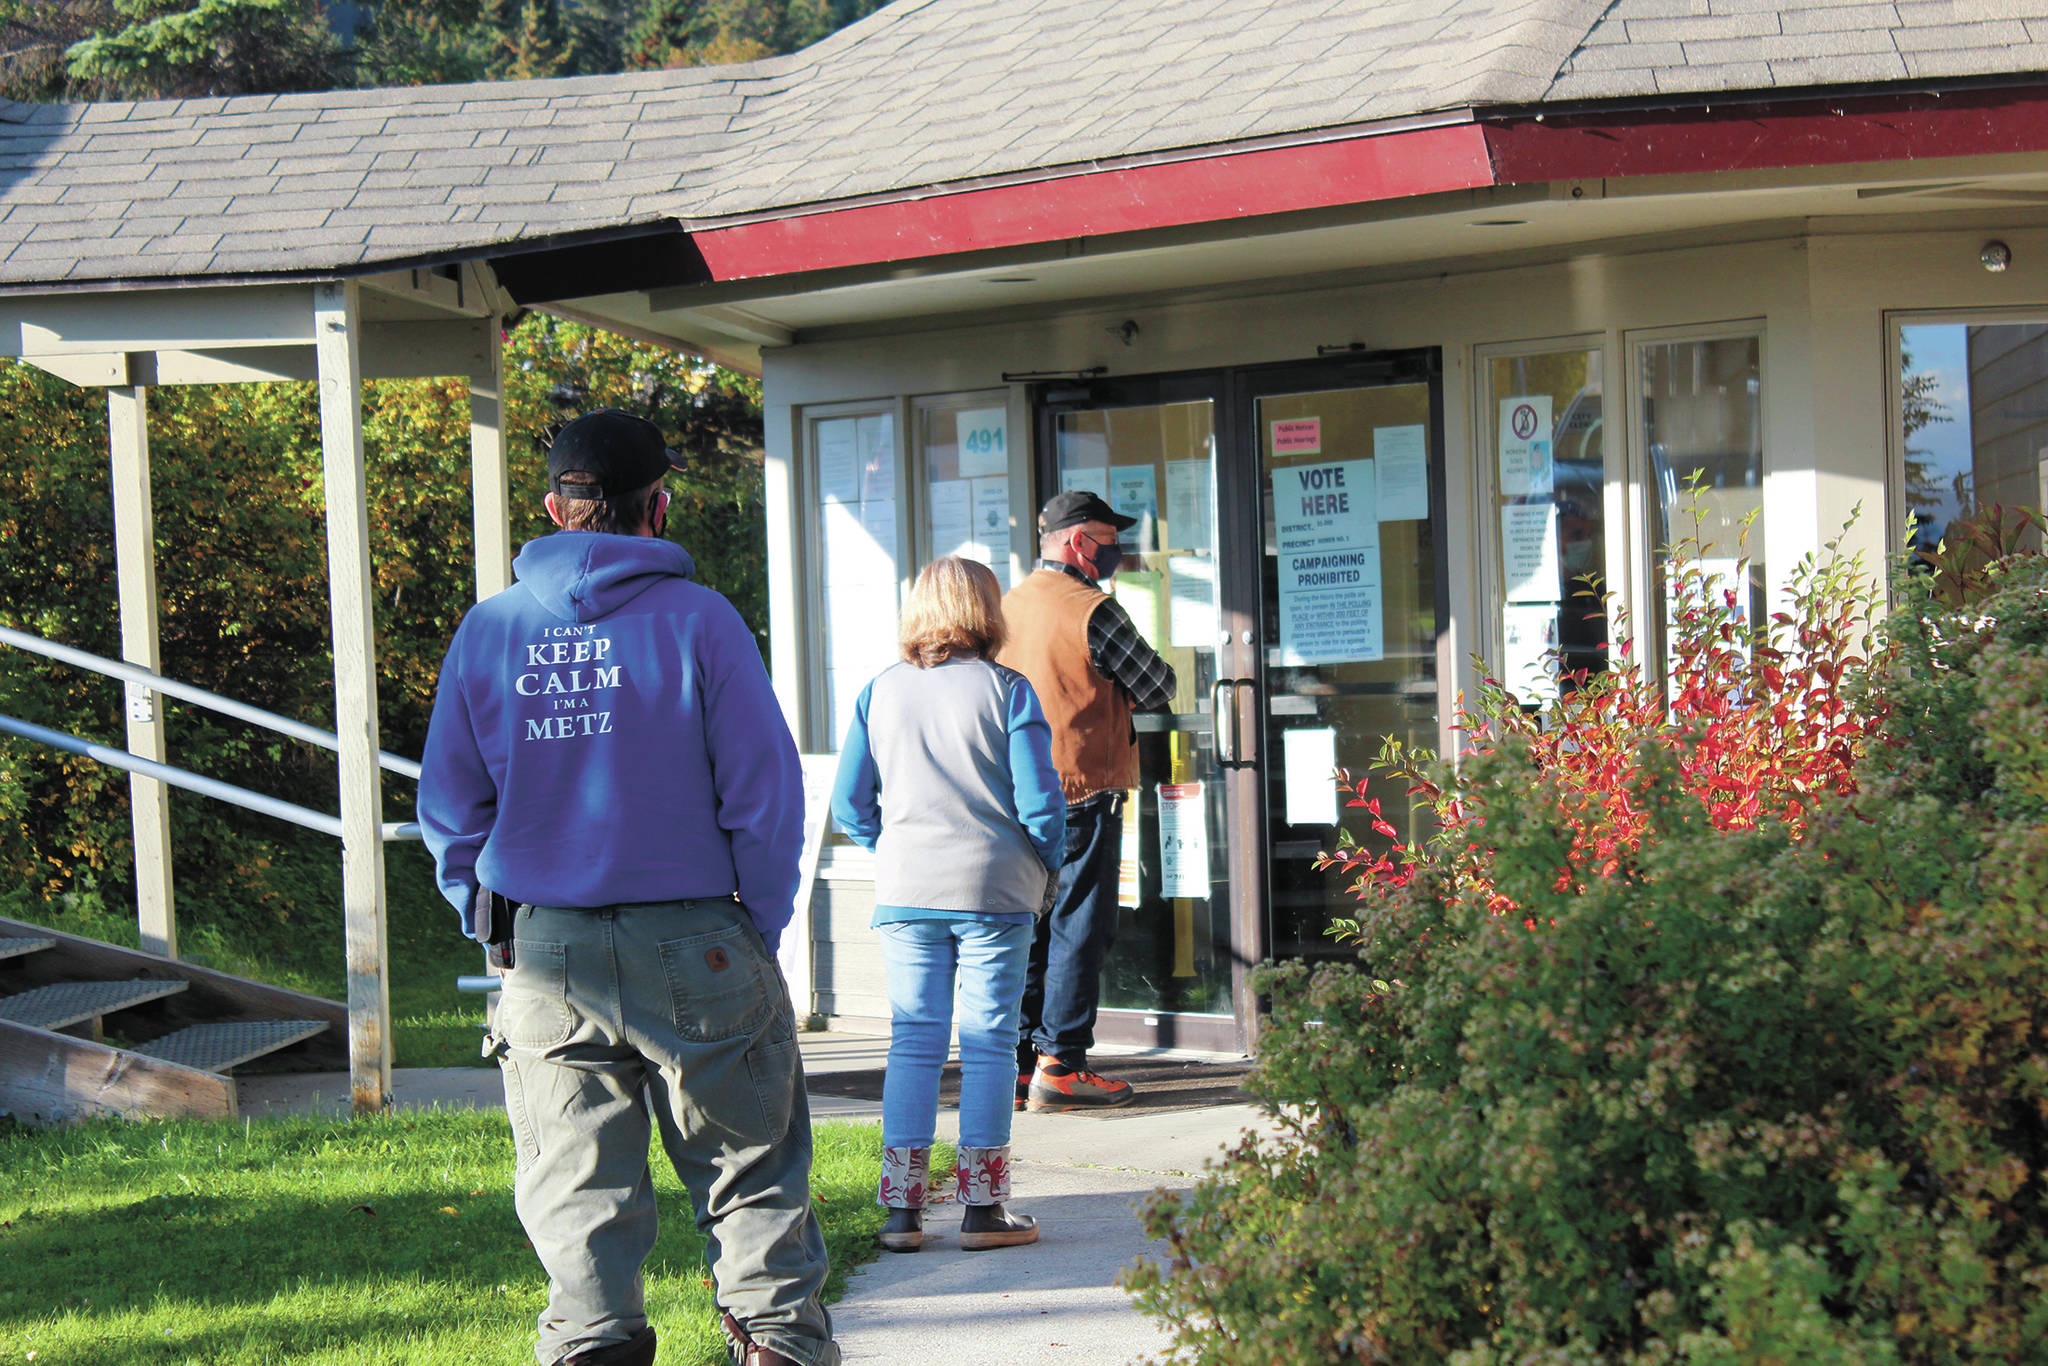 A short line forms outside of Homer City Hall as people wait to vote in the regular municipal election on Tuesday, Oct. 6, 2020 in Homer, Alaska. (Photo by Megan Pacer/Homer News)